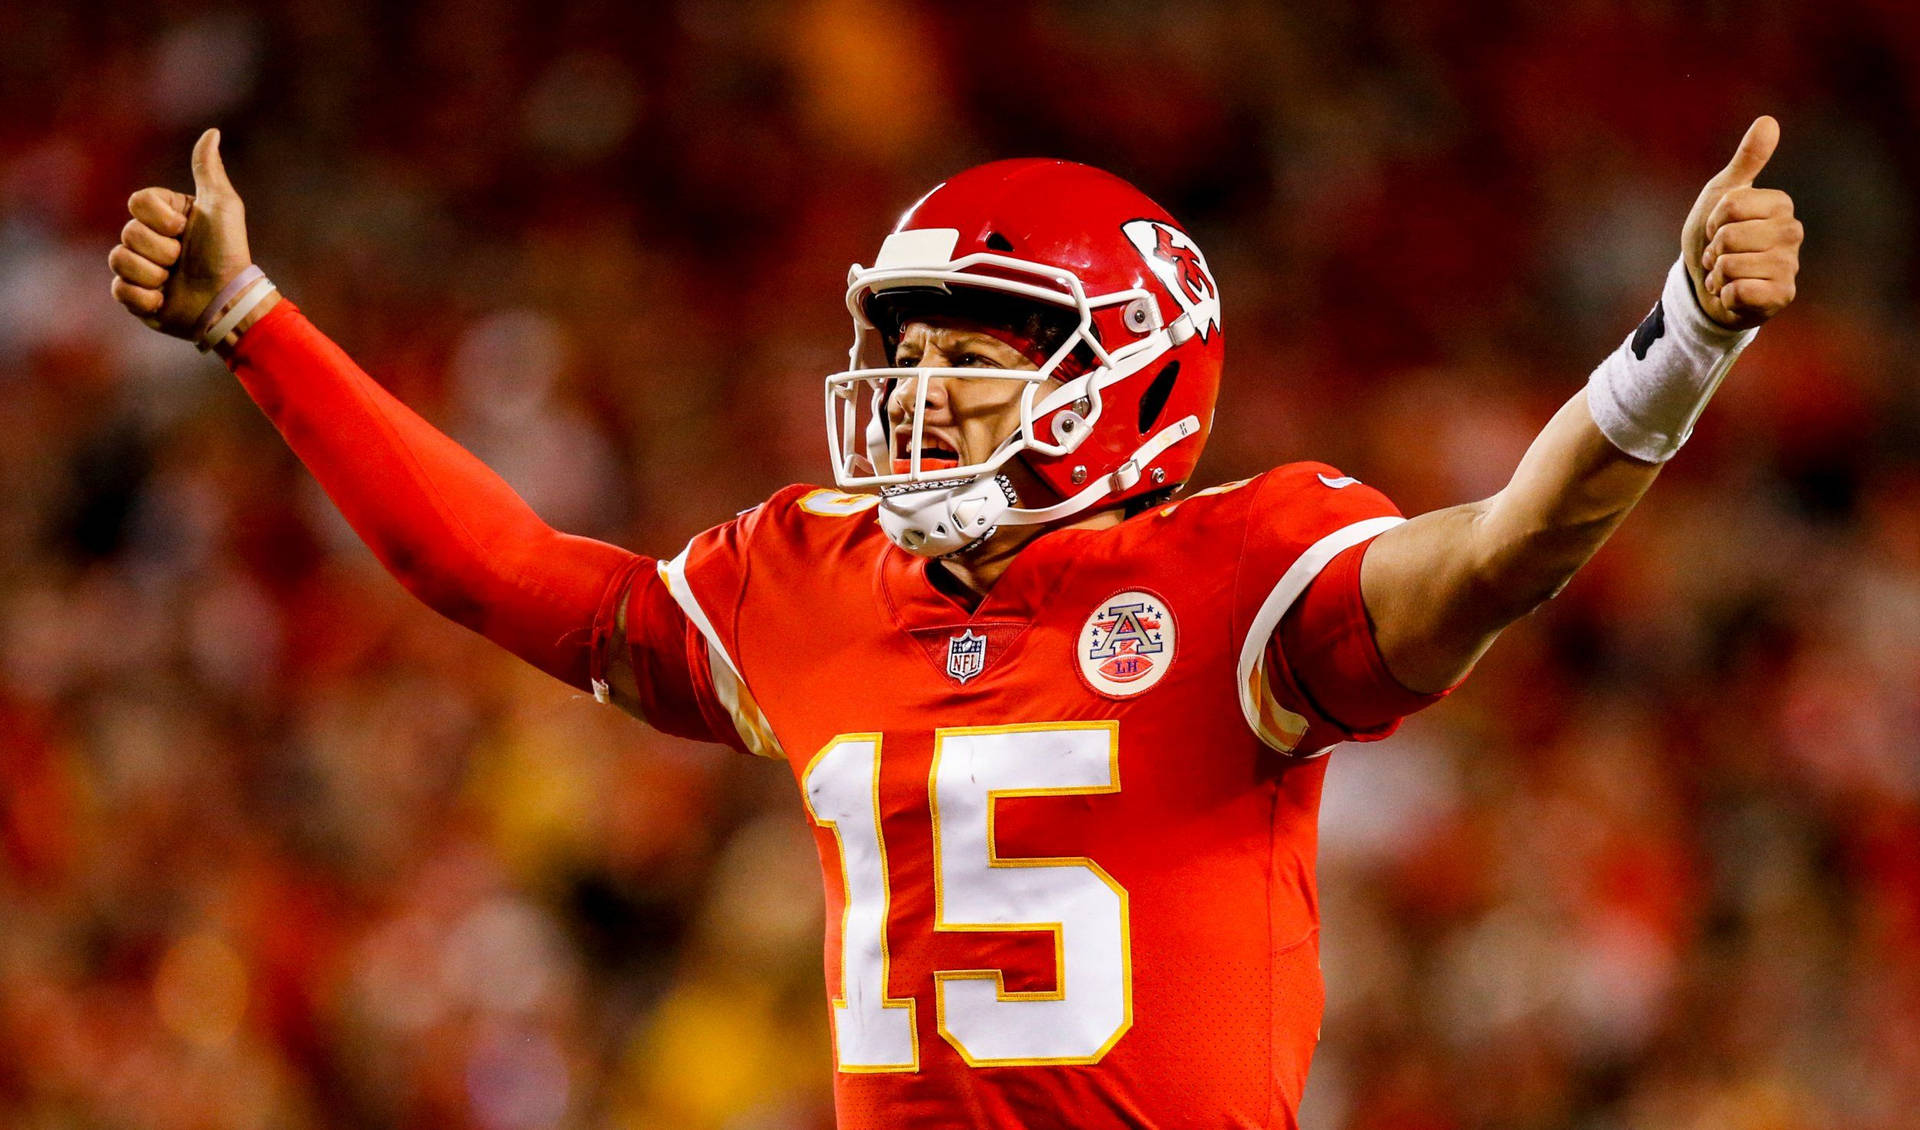 "Patrick Mahomes Celebrates Victory With a Thumbs Up". Wallpaper